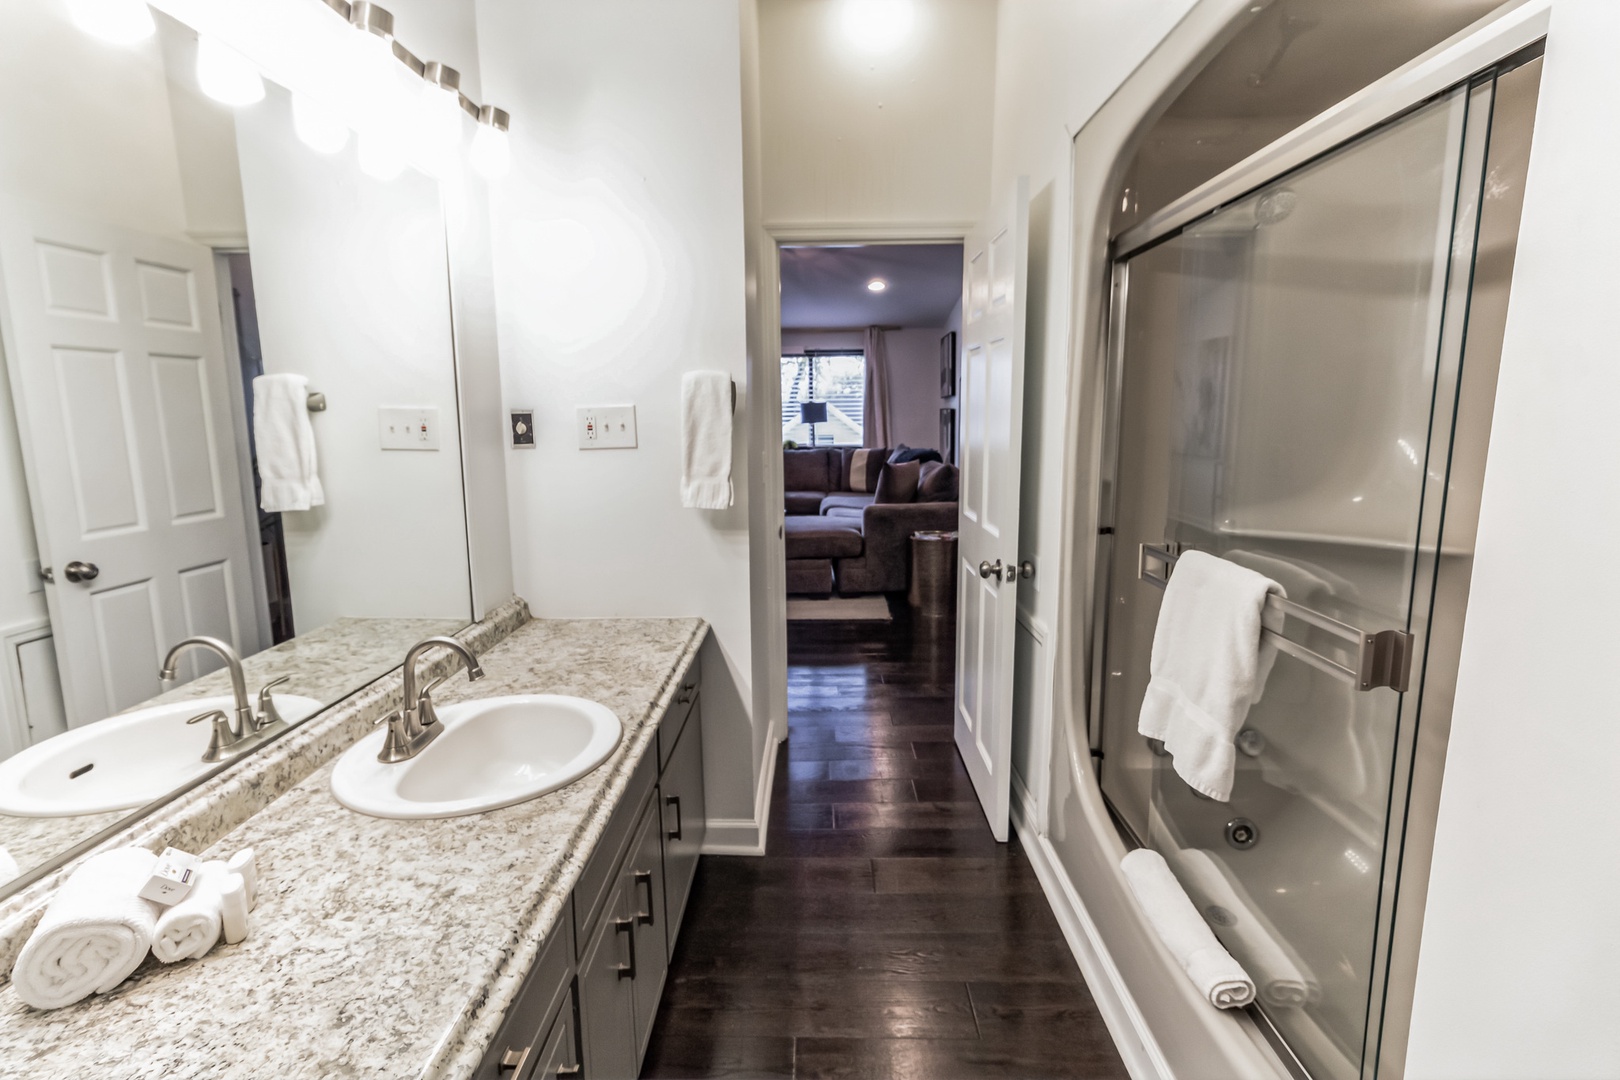 Unit C2: The 2nd floor full bathroom includes a large vanity & shower/tub combo